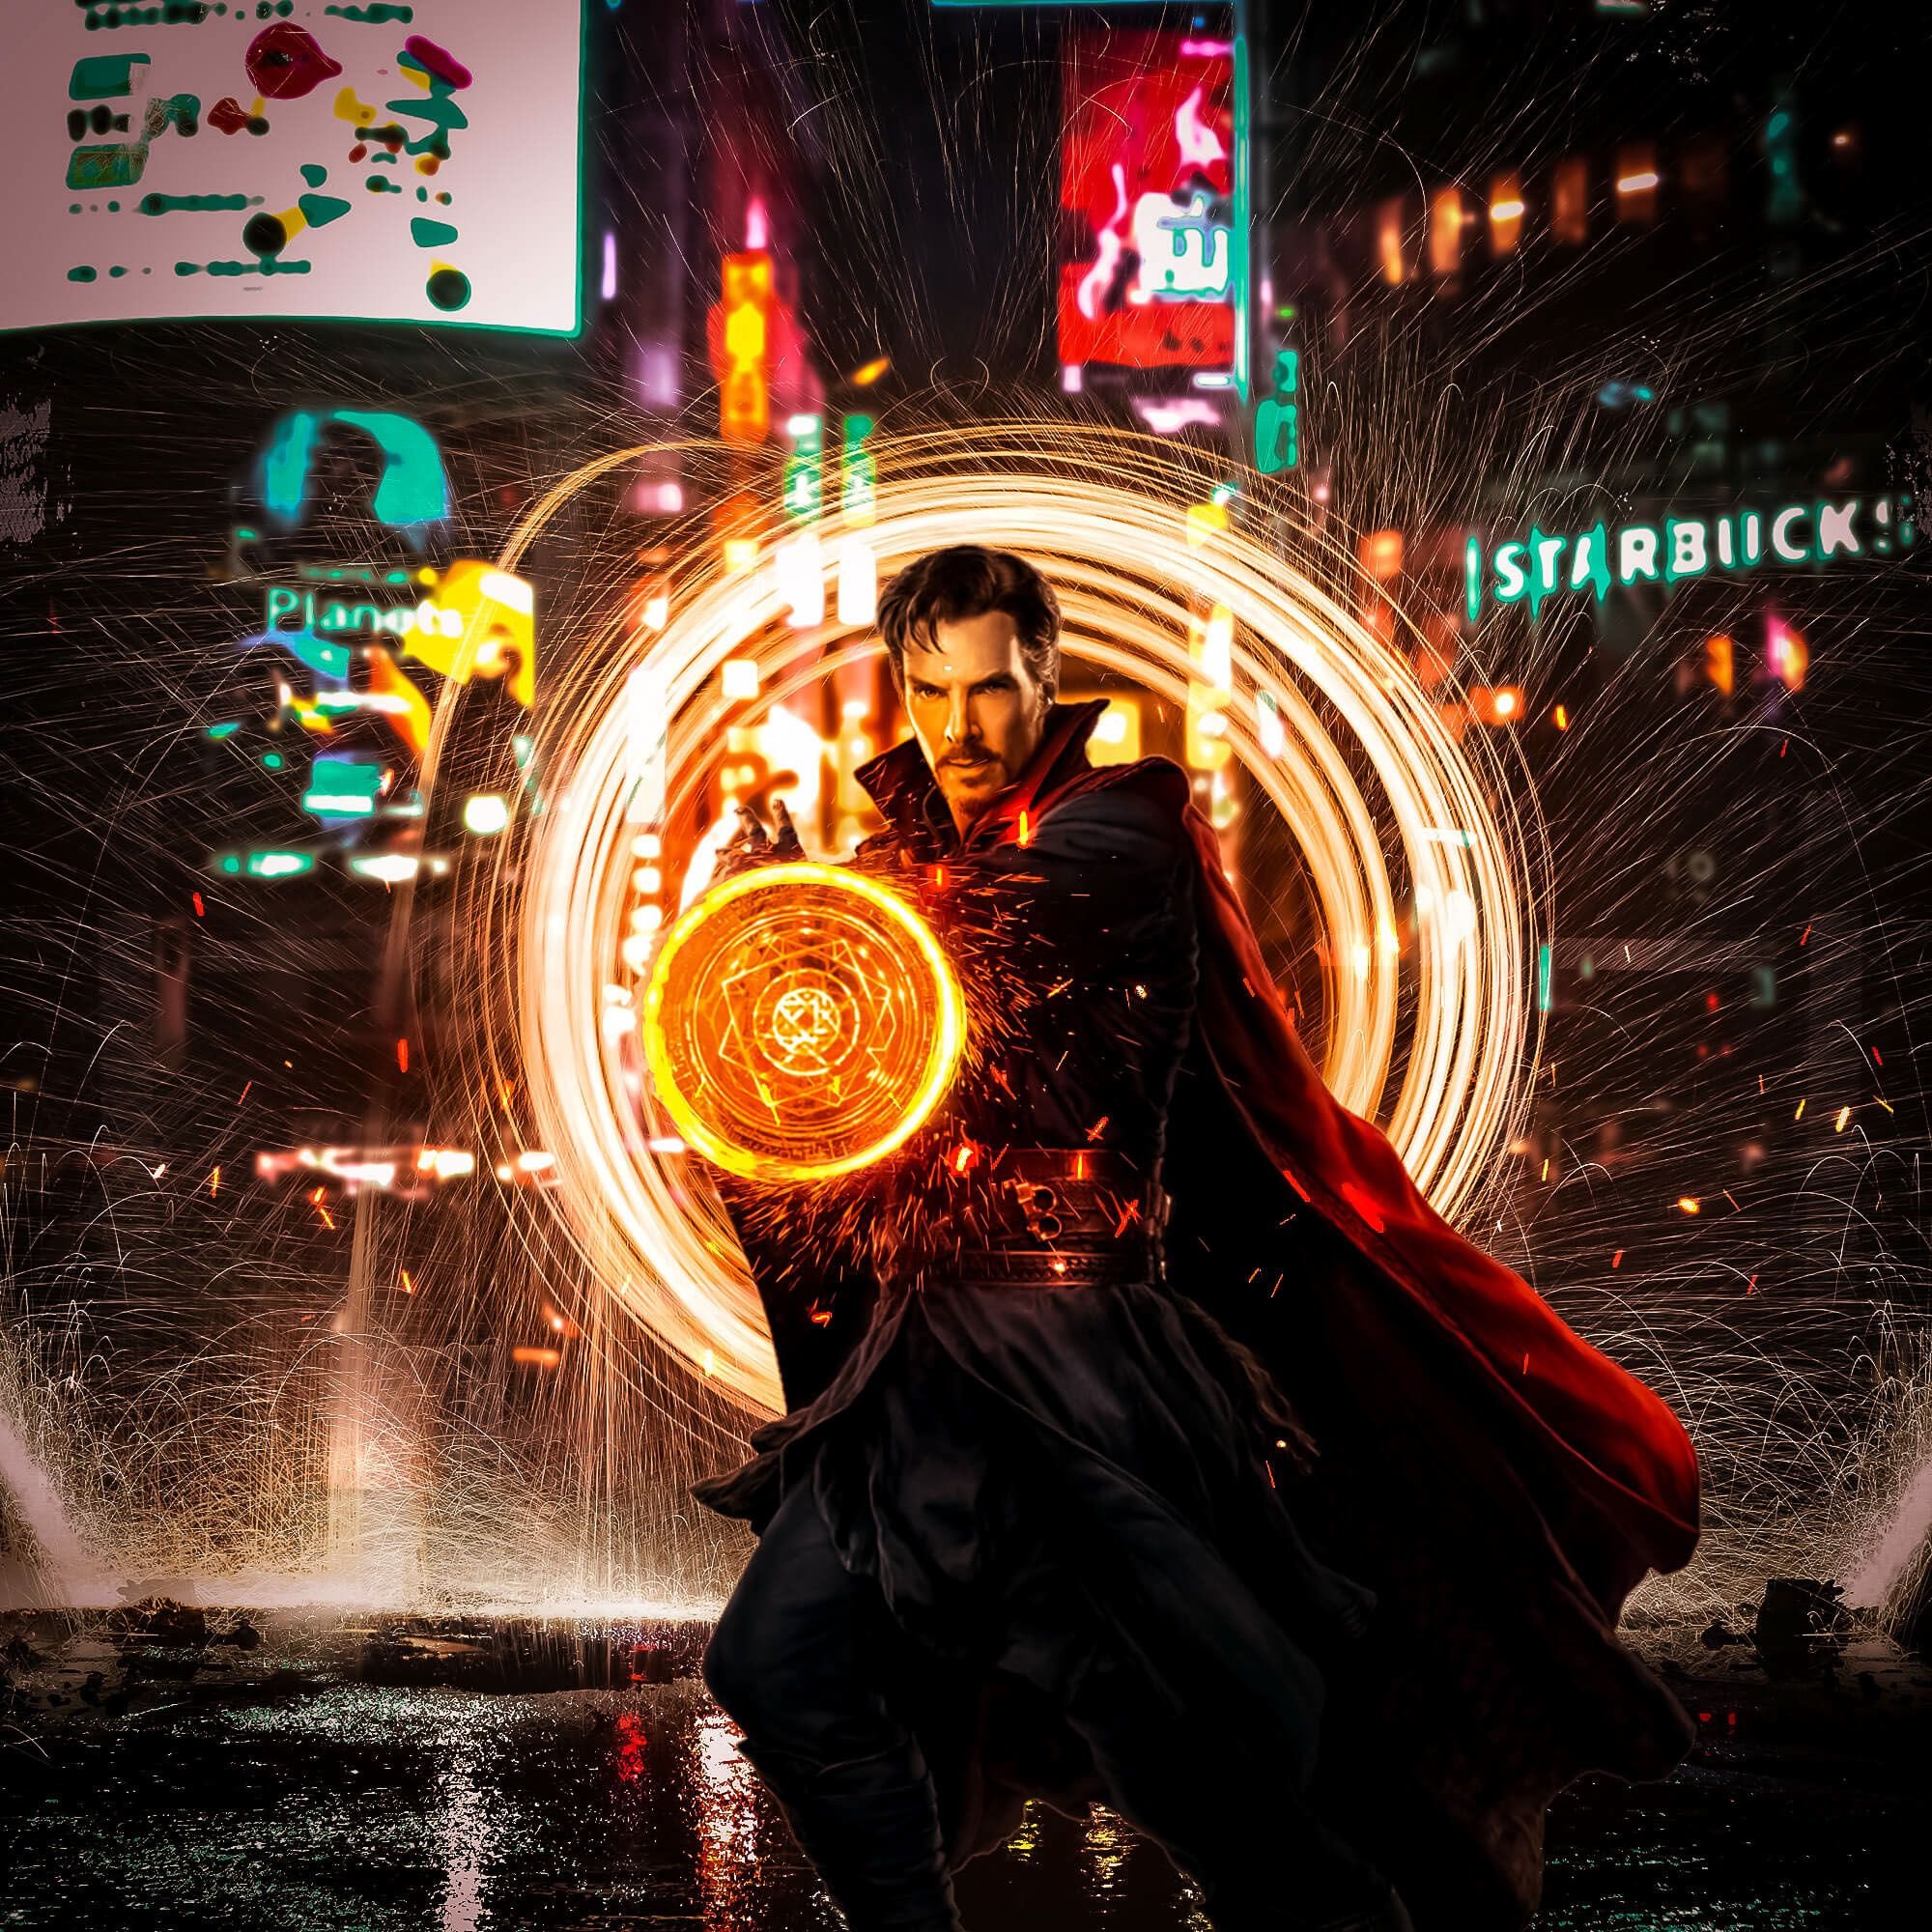 Marvel Anime Fgures Doctor Strange Pvc Toys In The Multiverse Of Madness  Cosplay Led Magic Spell Disc 1:1 Superhero Action Figma - Action Figures -  AliExpress